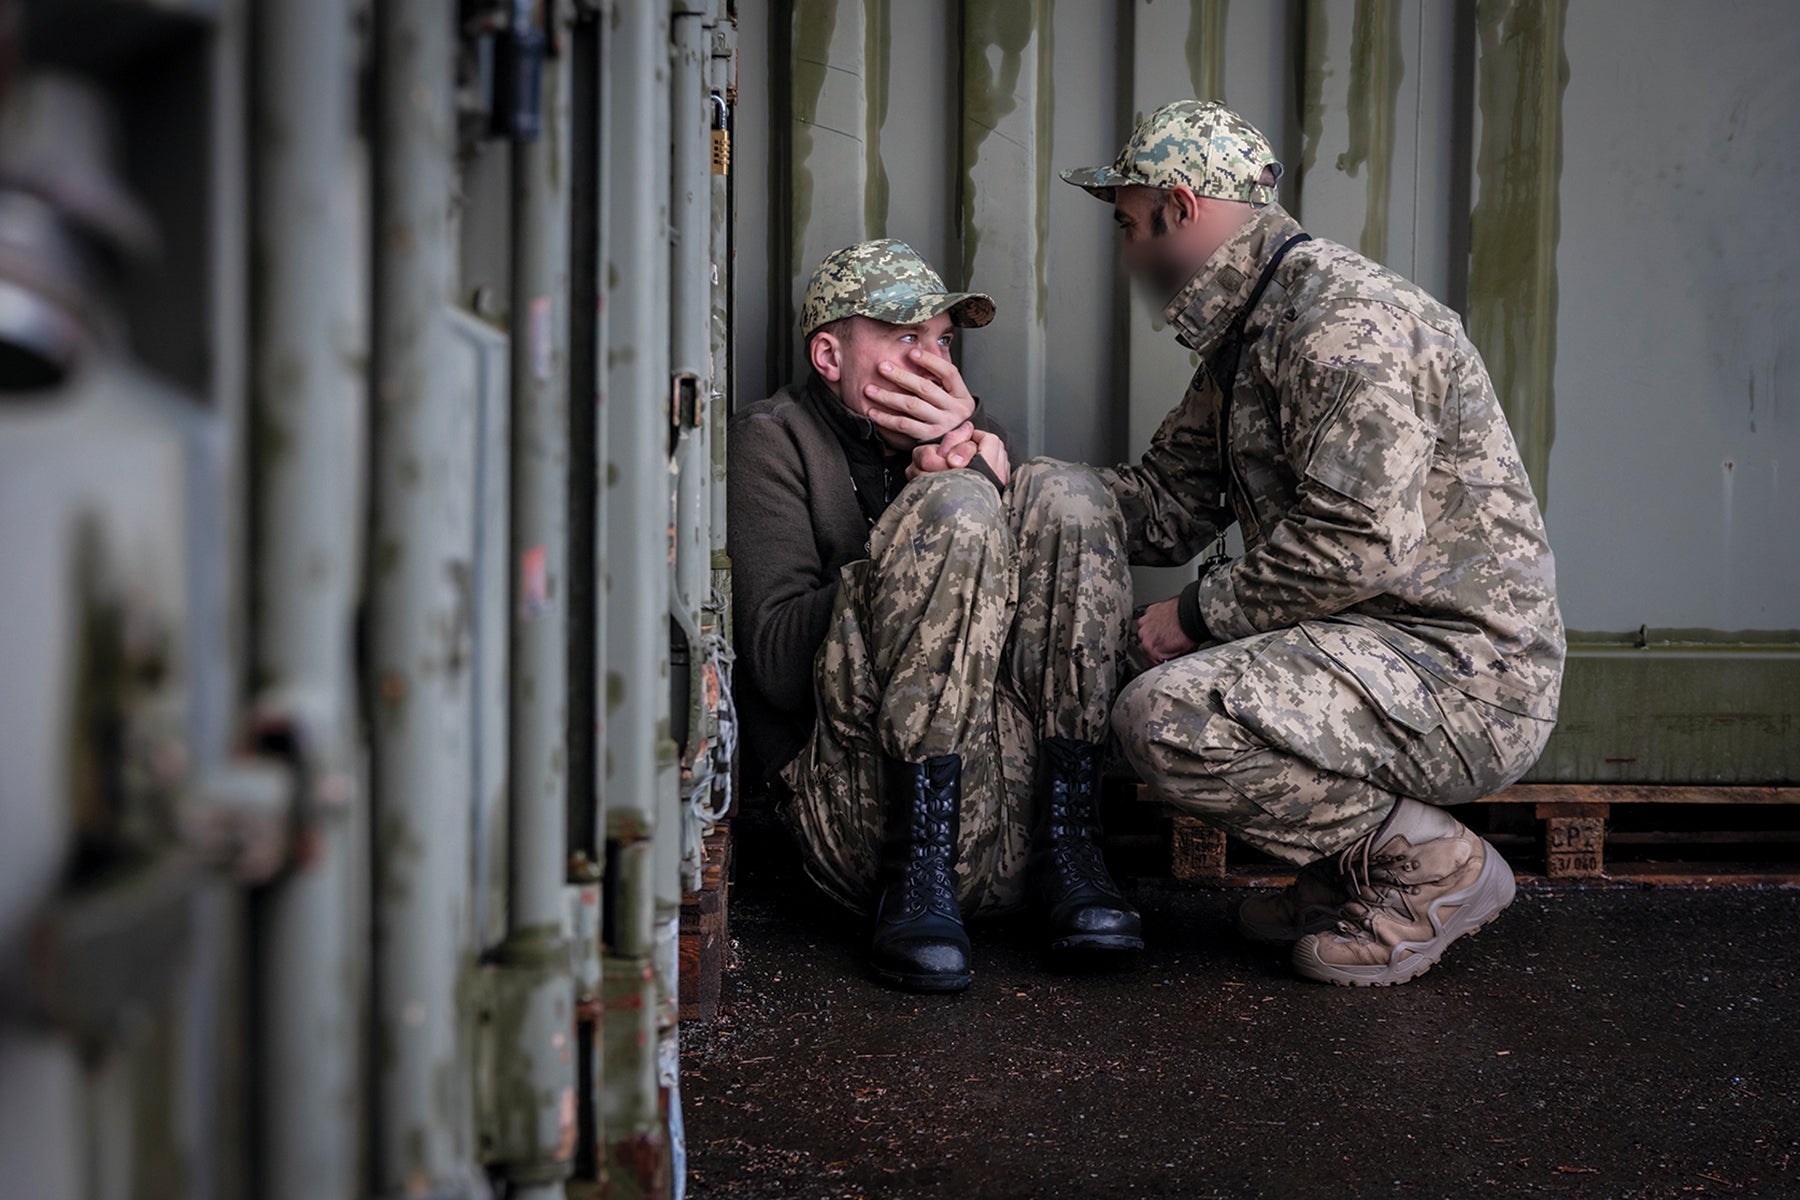 Norwegian Armed Forces Joint Medical Services instructors lead training near Trondheim, Norway, to help Ukrainian troops manage combat stress. The faces of Ukrainian participants are blurred to protect their identities. (Credit: Norwegian Home Guard/Kristian Kapelrud)